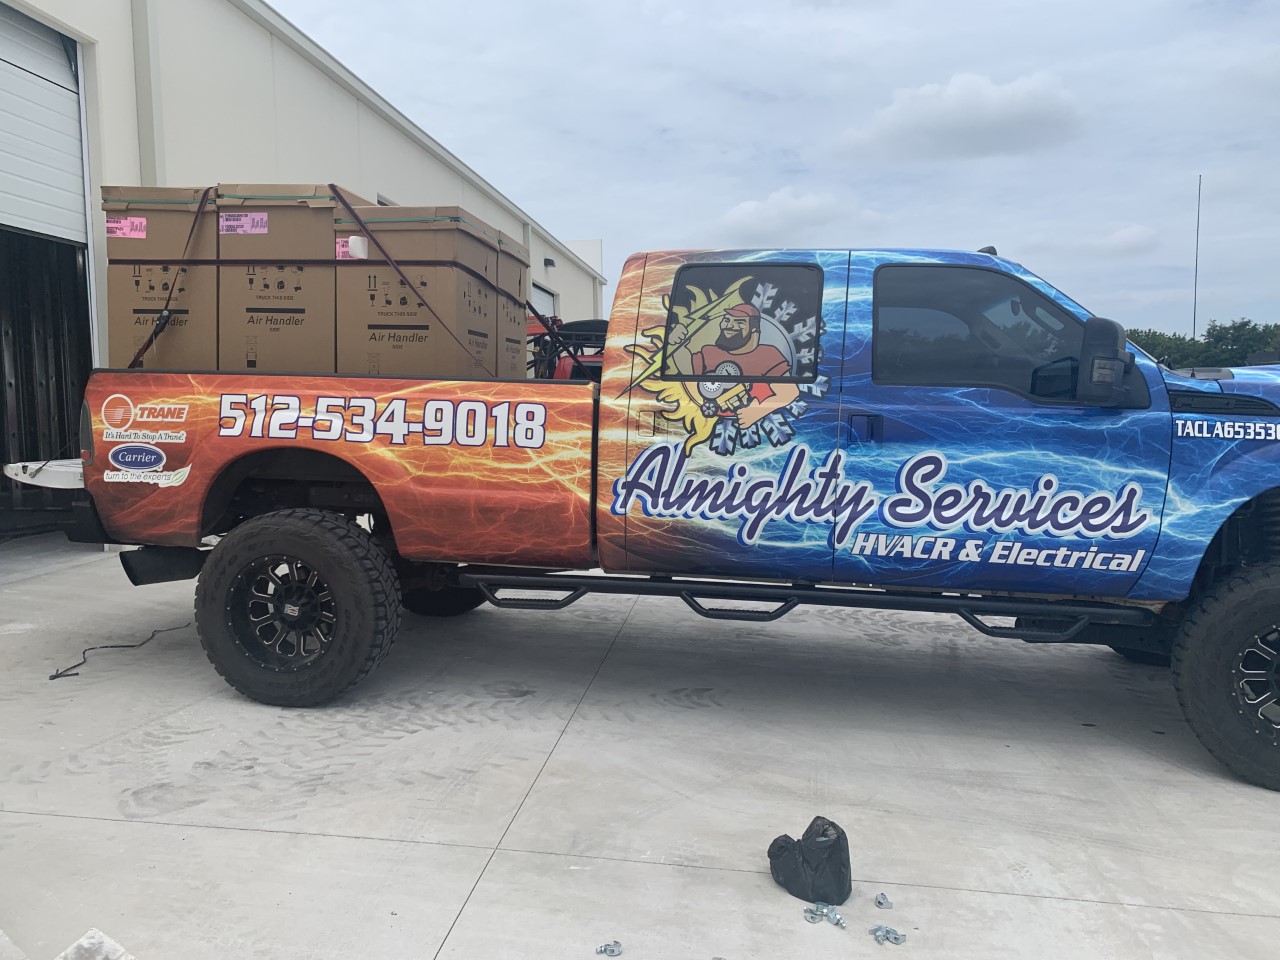 Almighty Services LLC